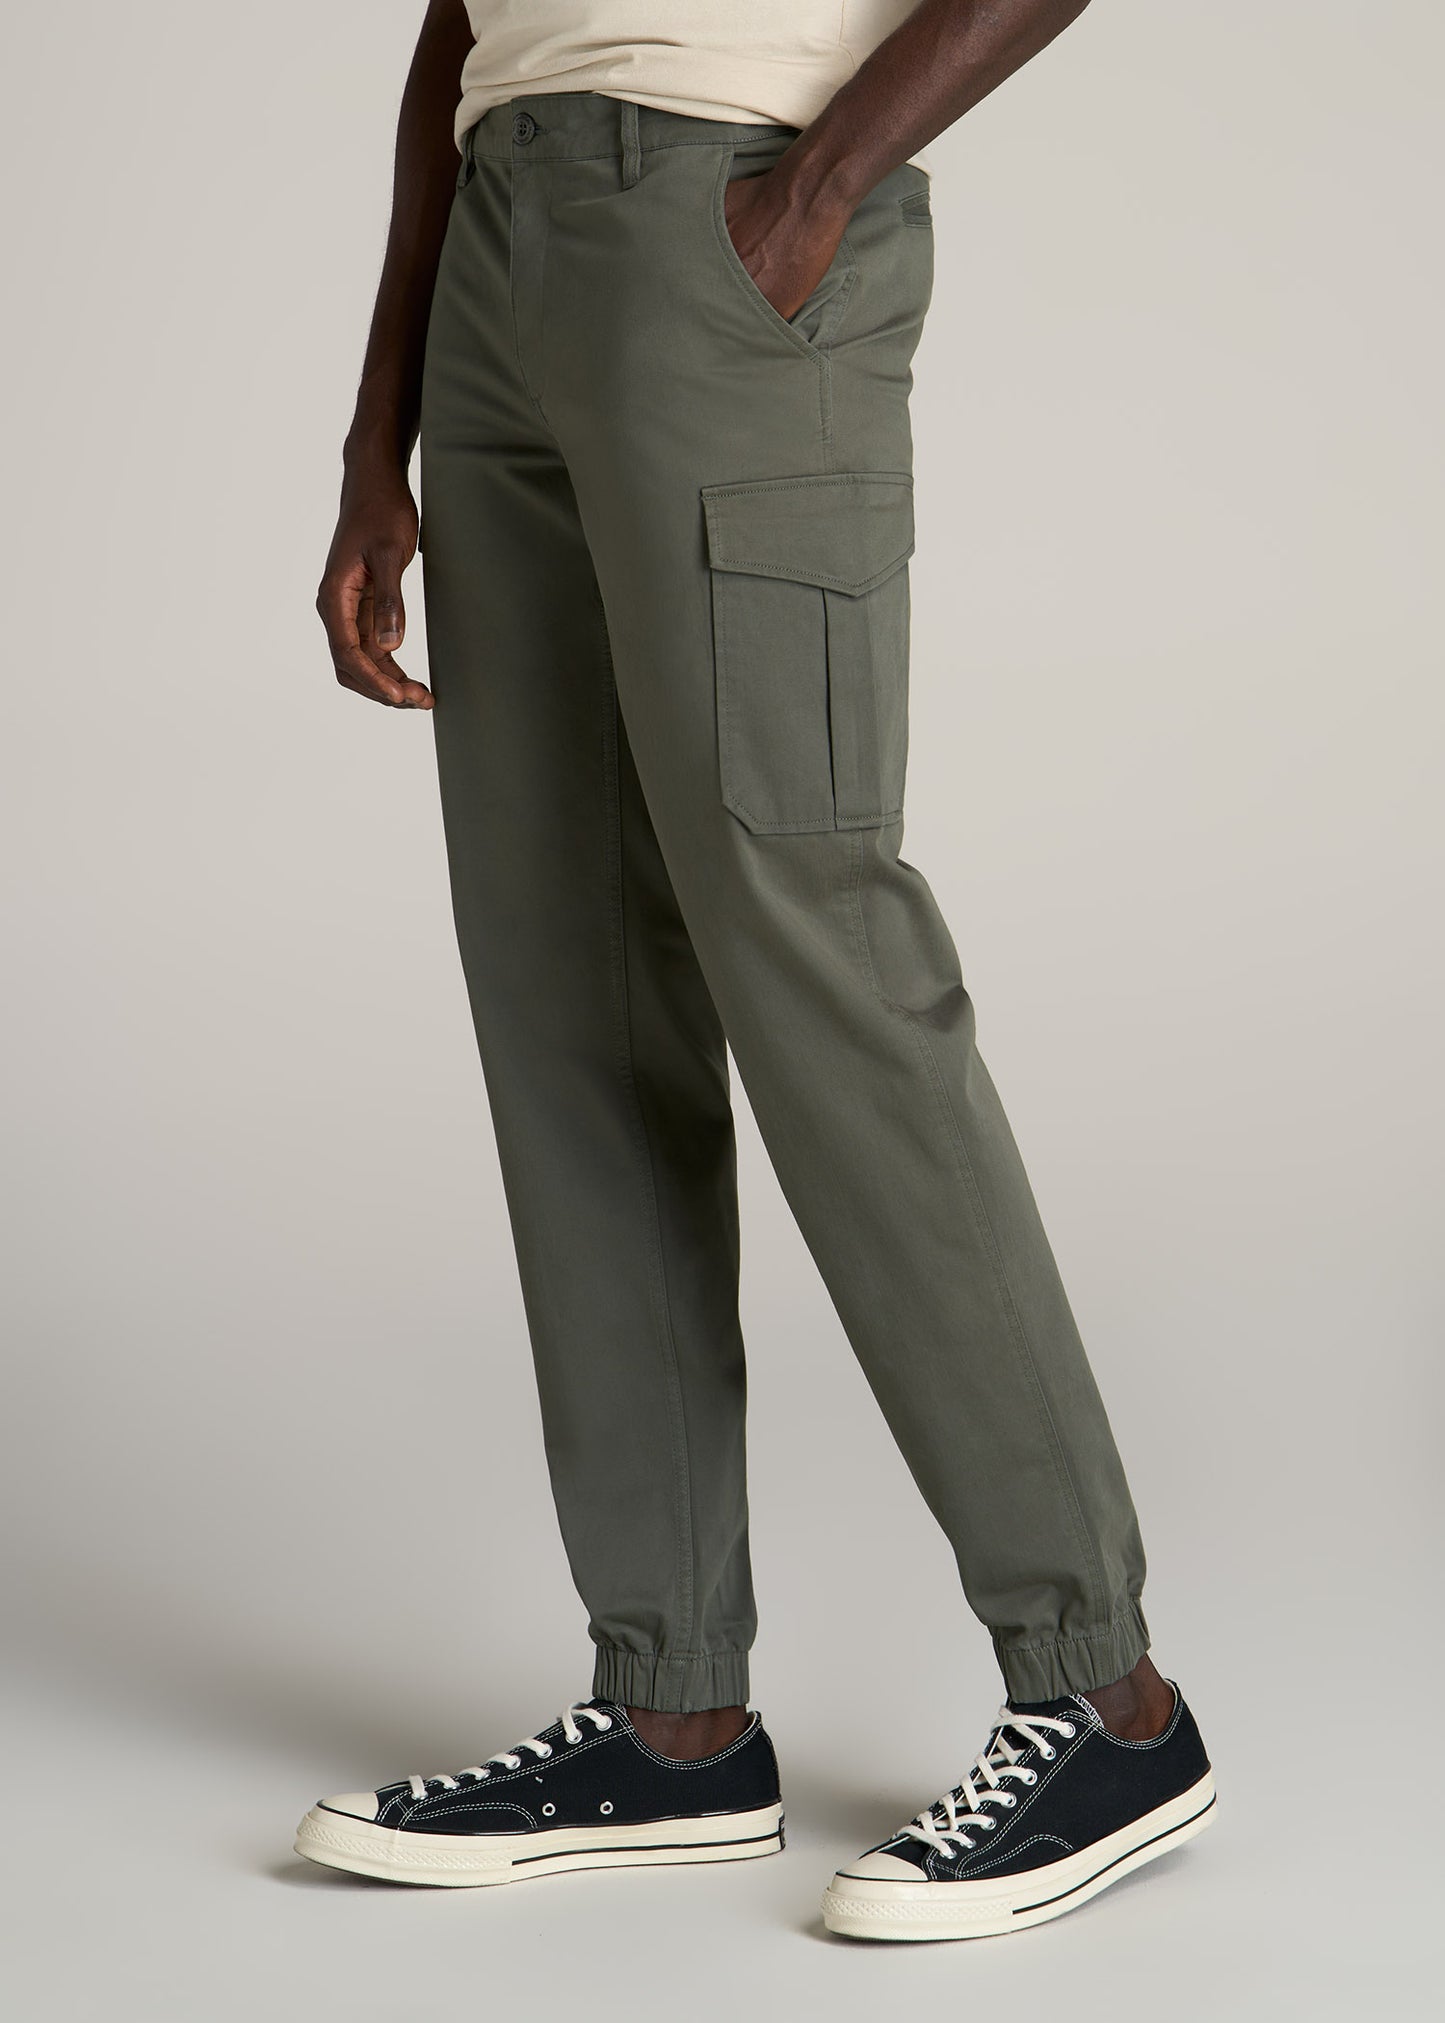 Fit-4-All Cargo Jogger Scrub Pant